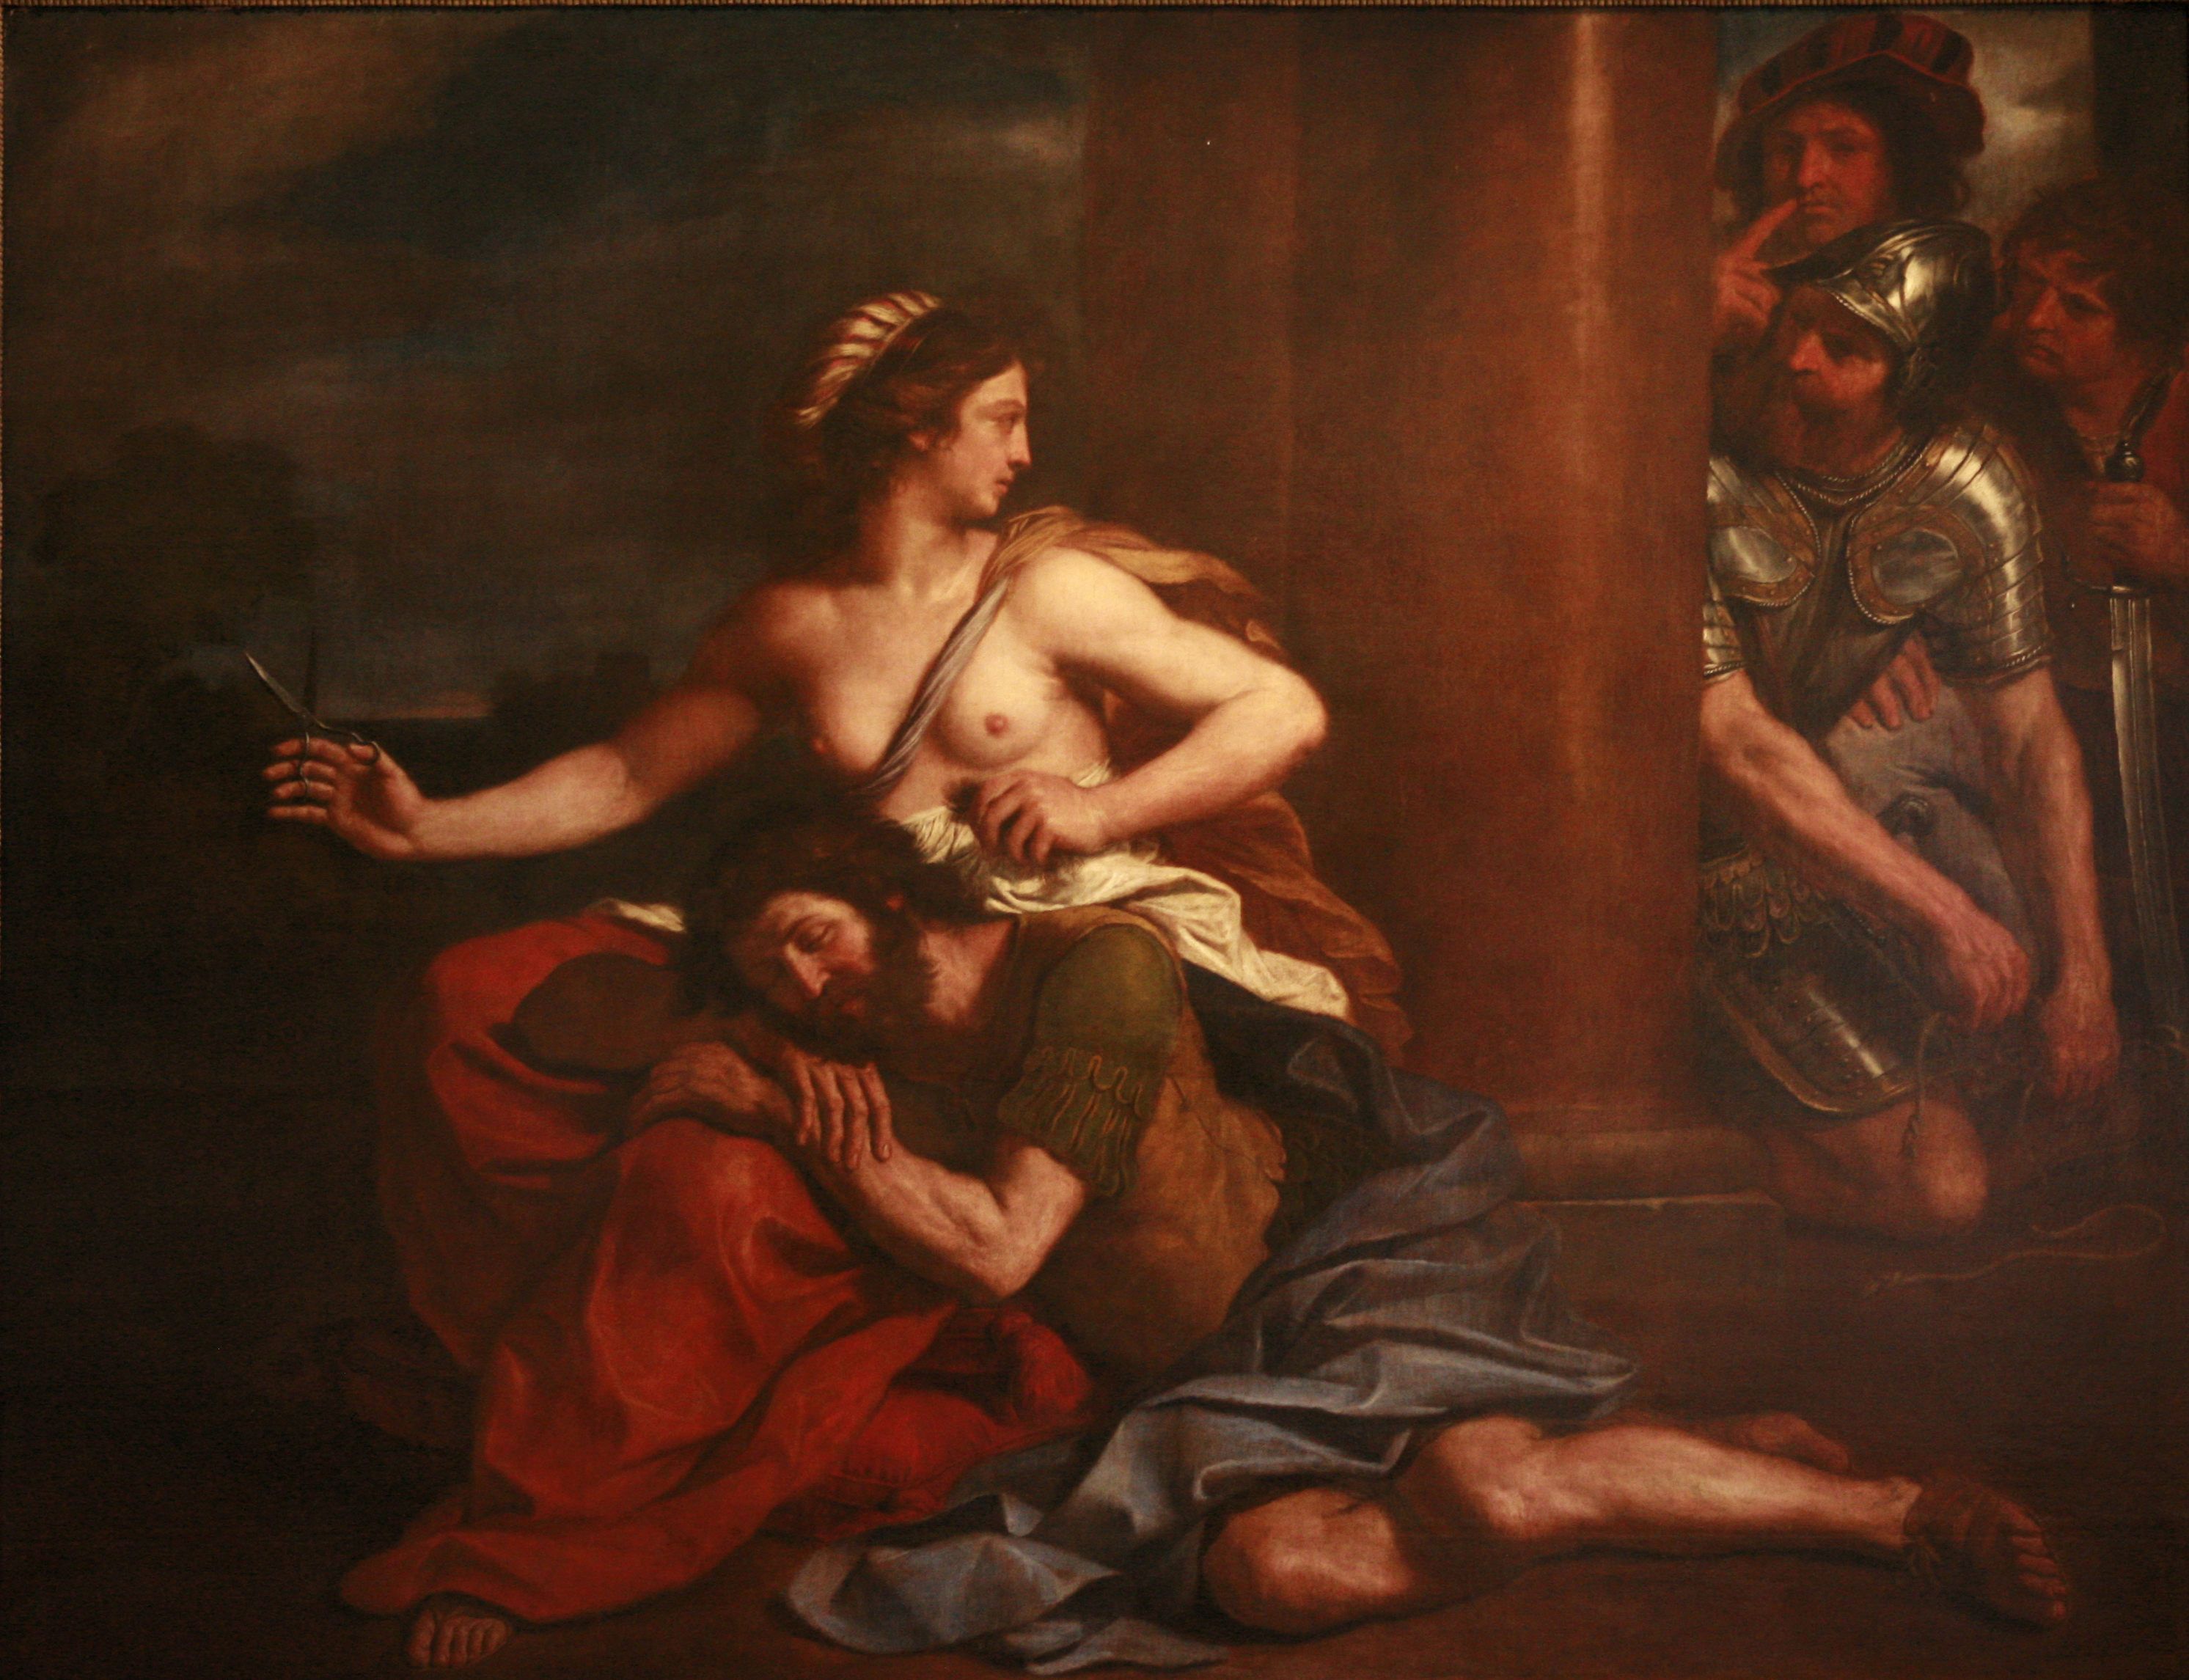 Samson And Delilah Painting. Explore